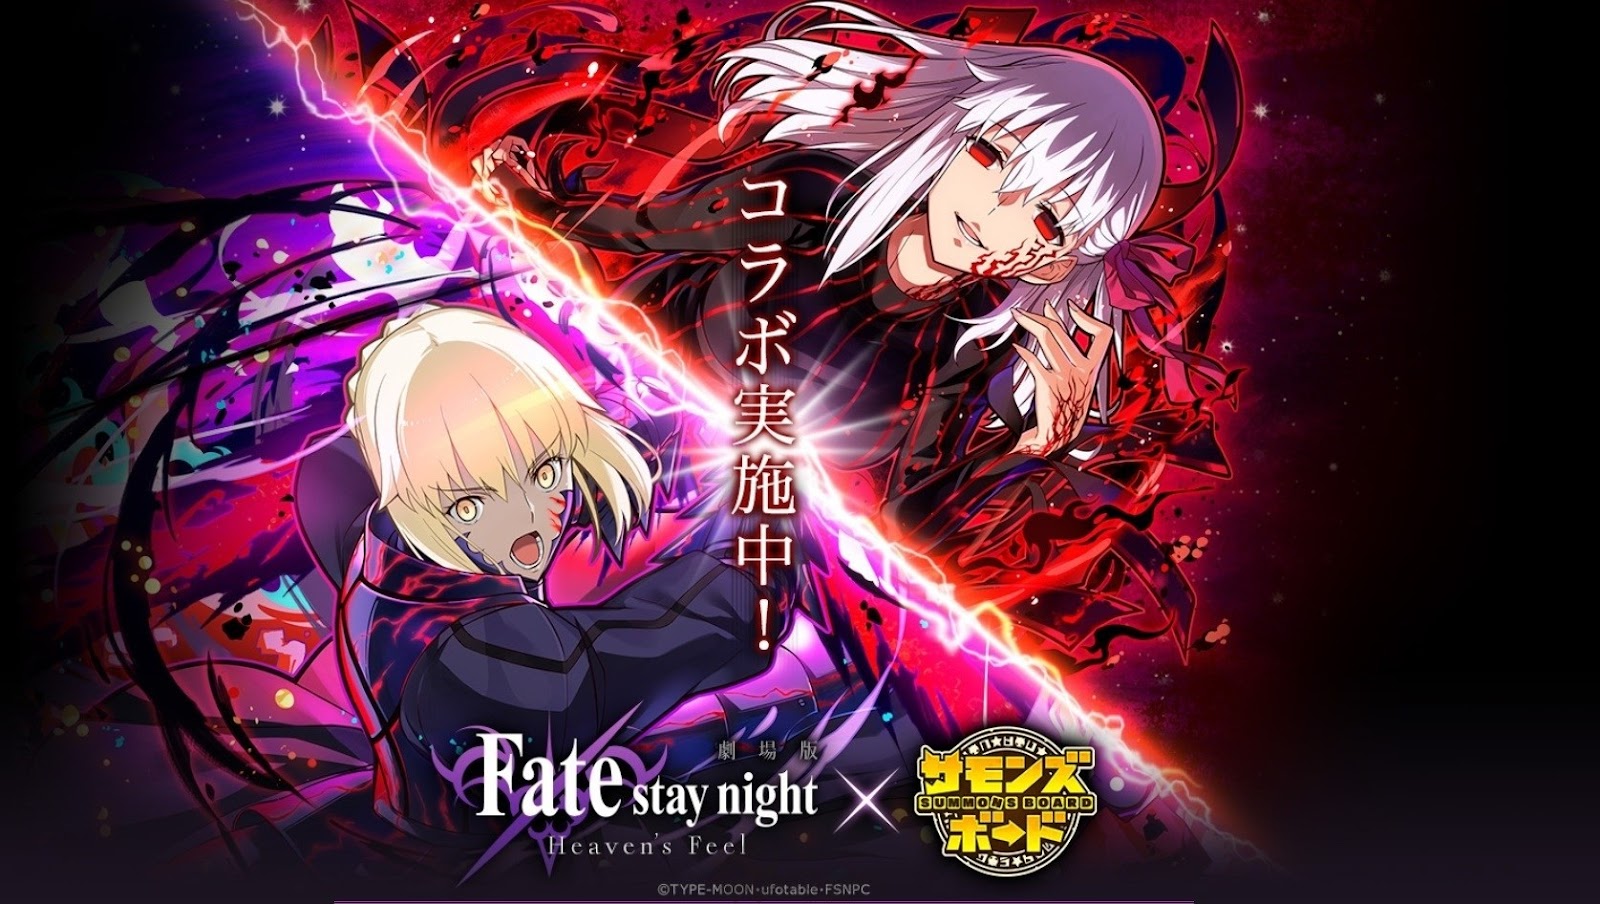 Fate/stay Night em Puzzle & Dragons